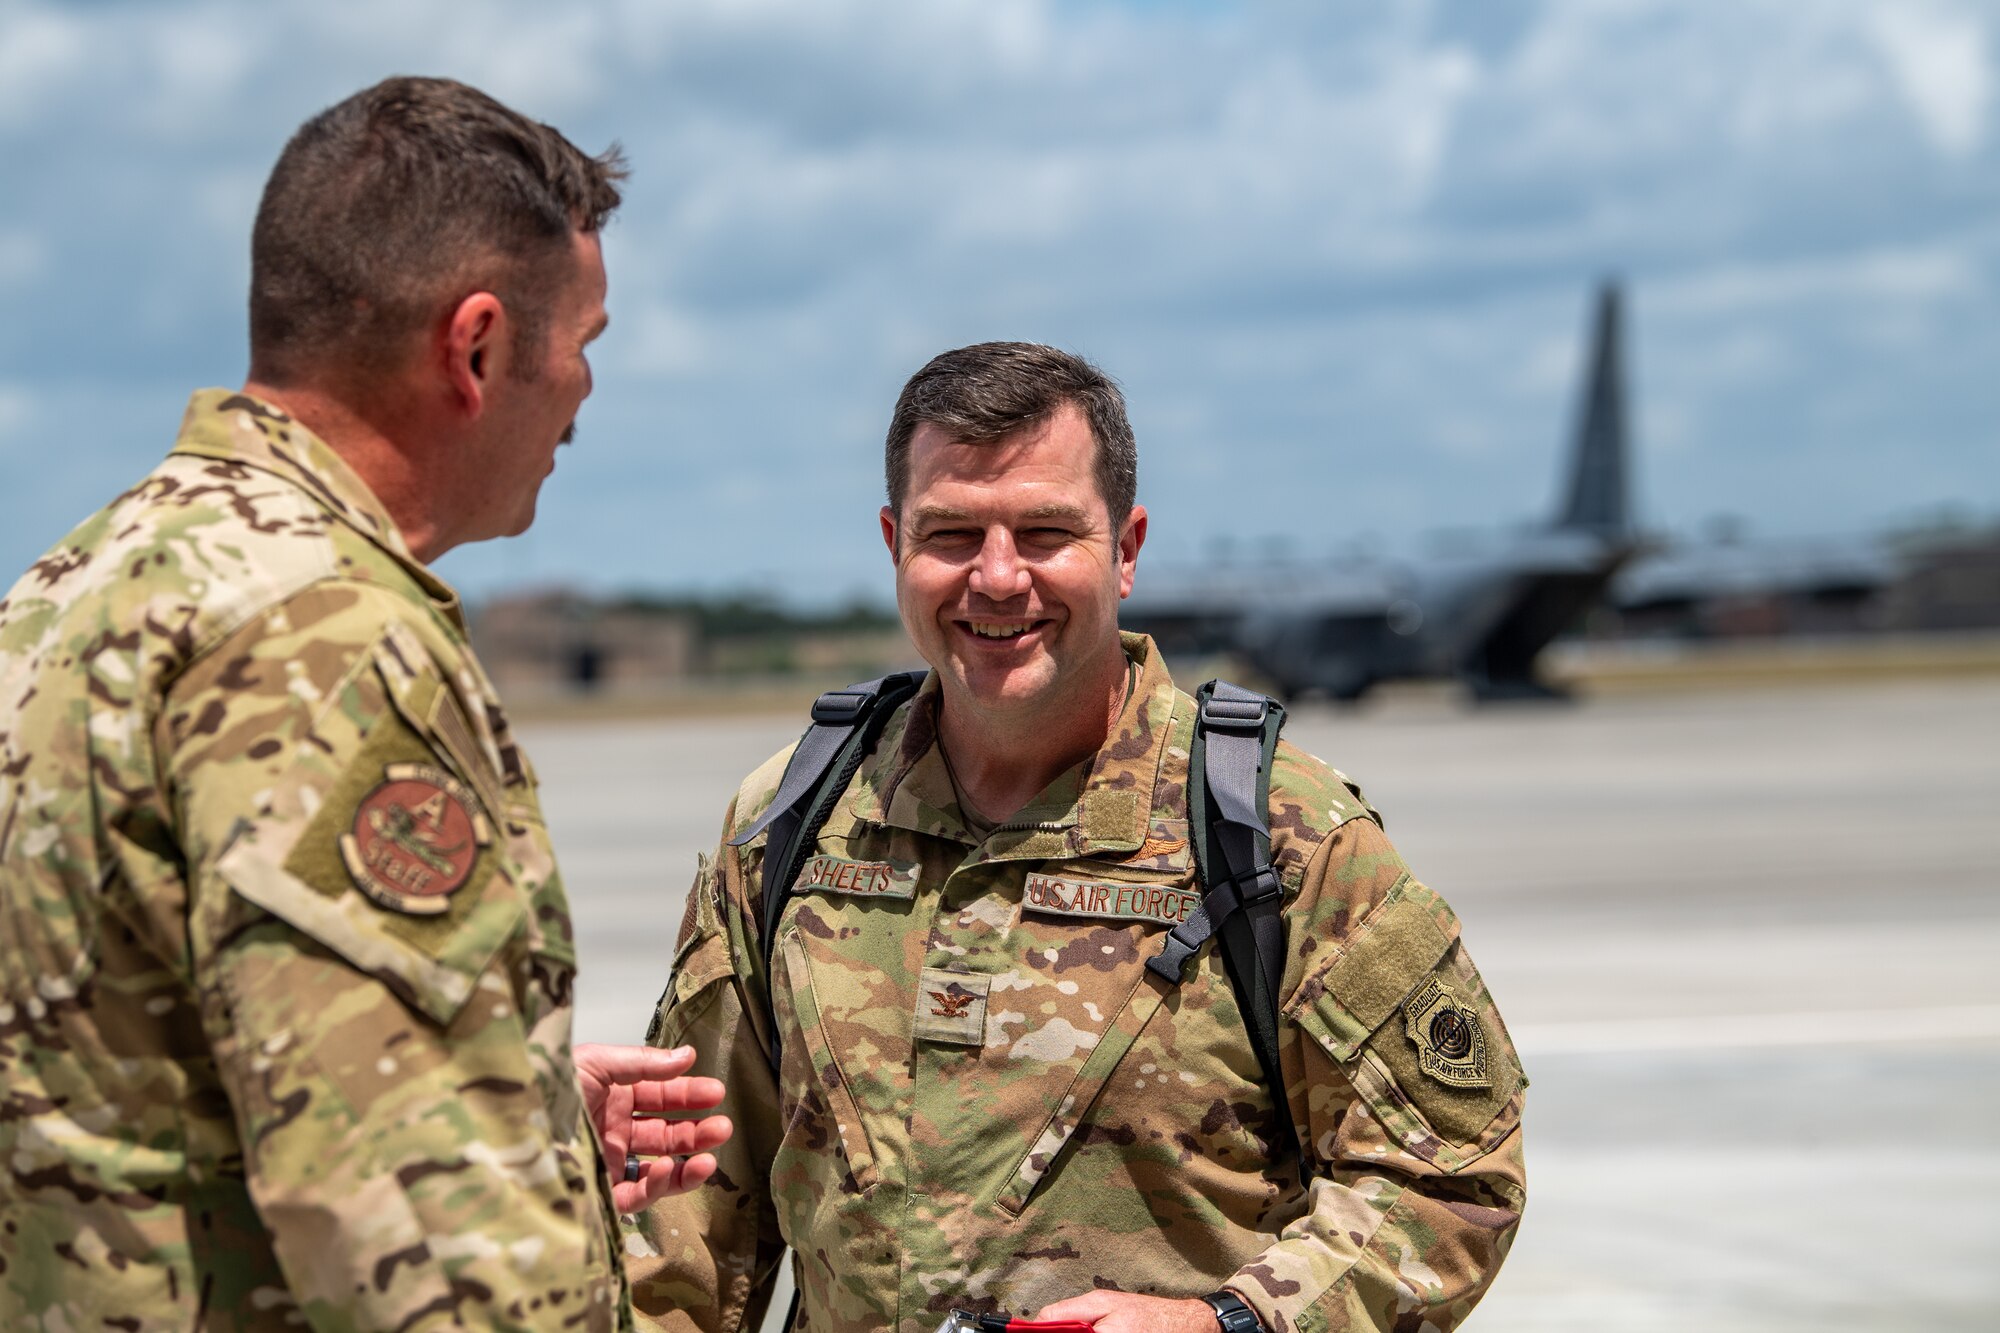 U.S. Air Force Col. Paul Sheets, 23rd Wing commander arrives to the main operating base during Exercise Ready Tiger 24-1 at Savannah Air National Guard Base, Georgia, April 10, 2024. During Ready Tiger 24-1, the 23rd Wing will be evaluated on the integration of Air Force Force Generation principles such as Agile Combat Employment, integrated combat turns, forward aerial refueling points, multi-capable Airmen, and combat search and rescue capabilities. (U.S. Air Force photo by Senior Airman Courtney Sebastianelli)